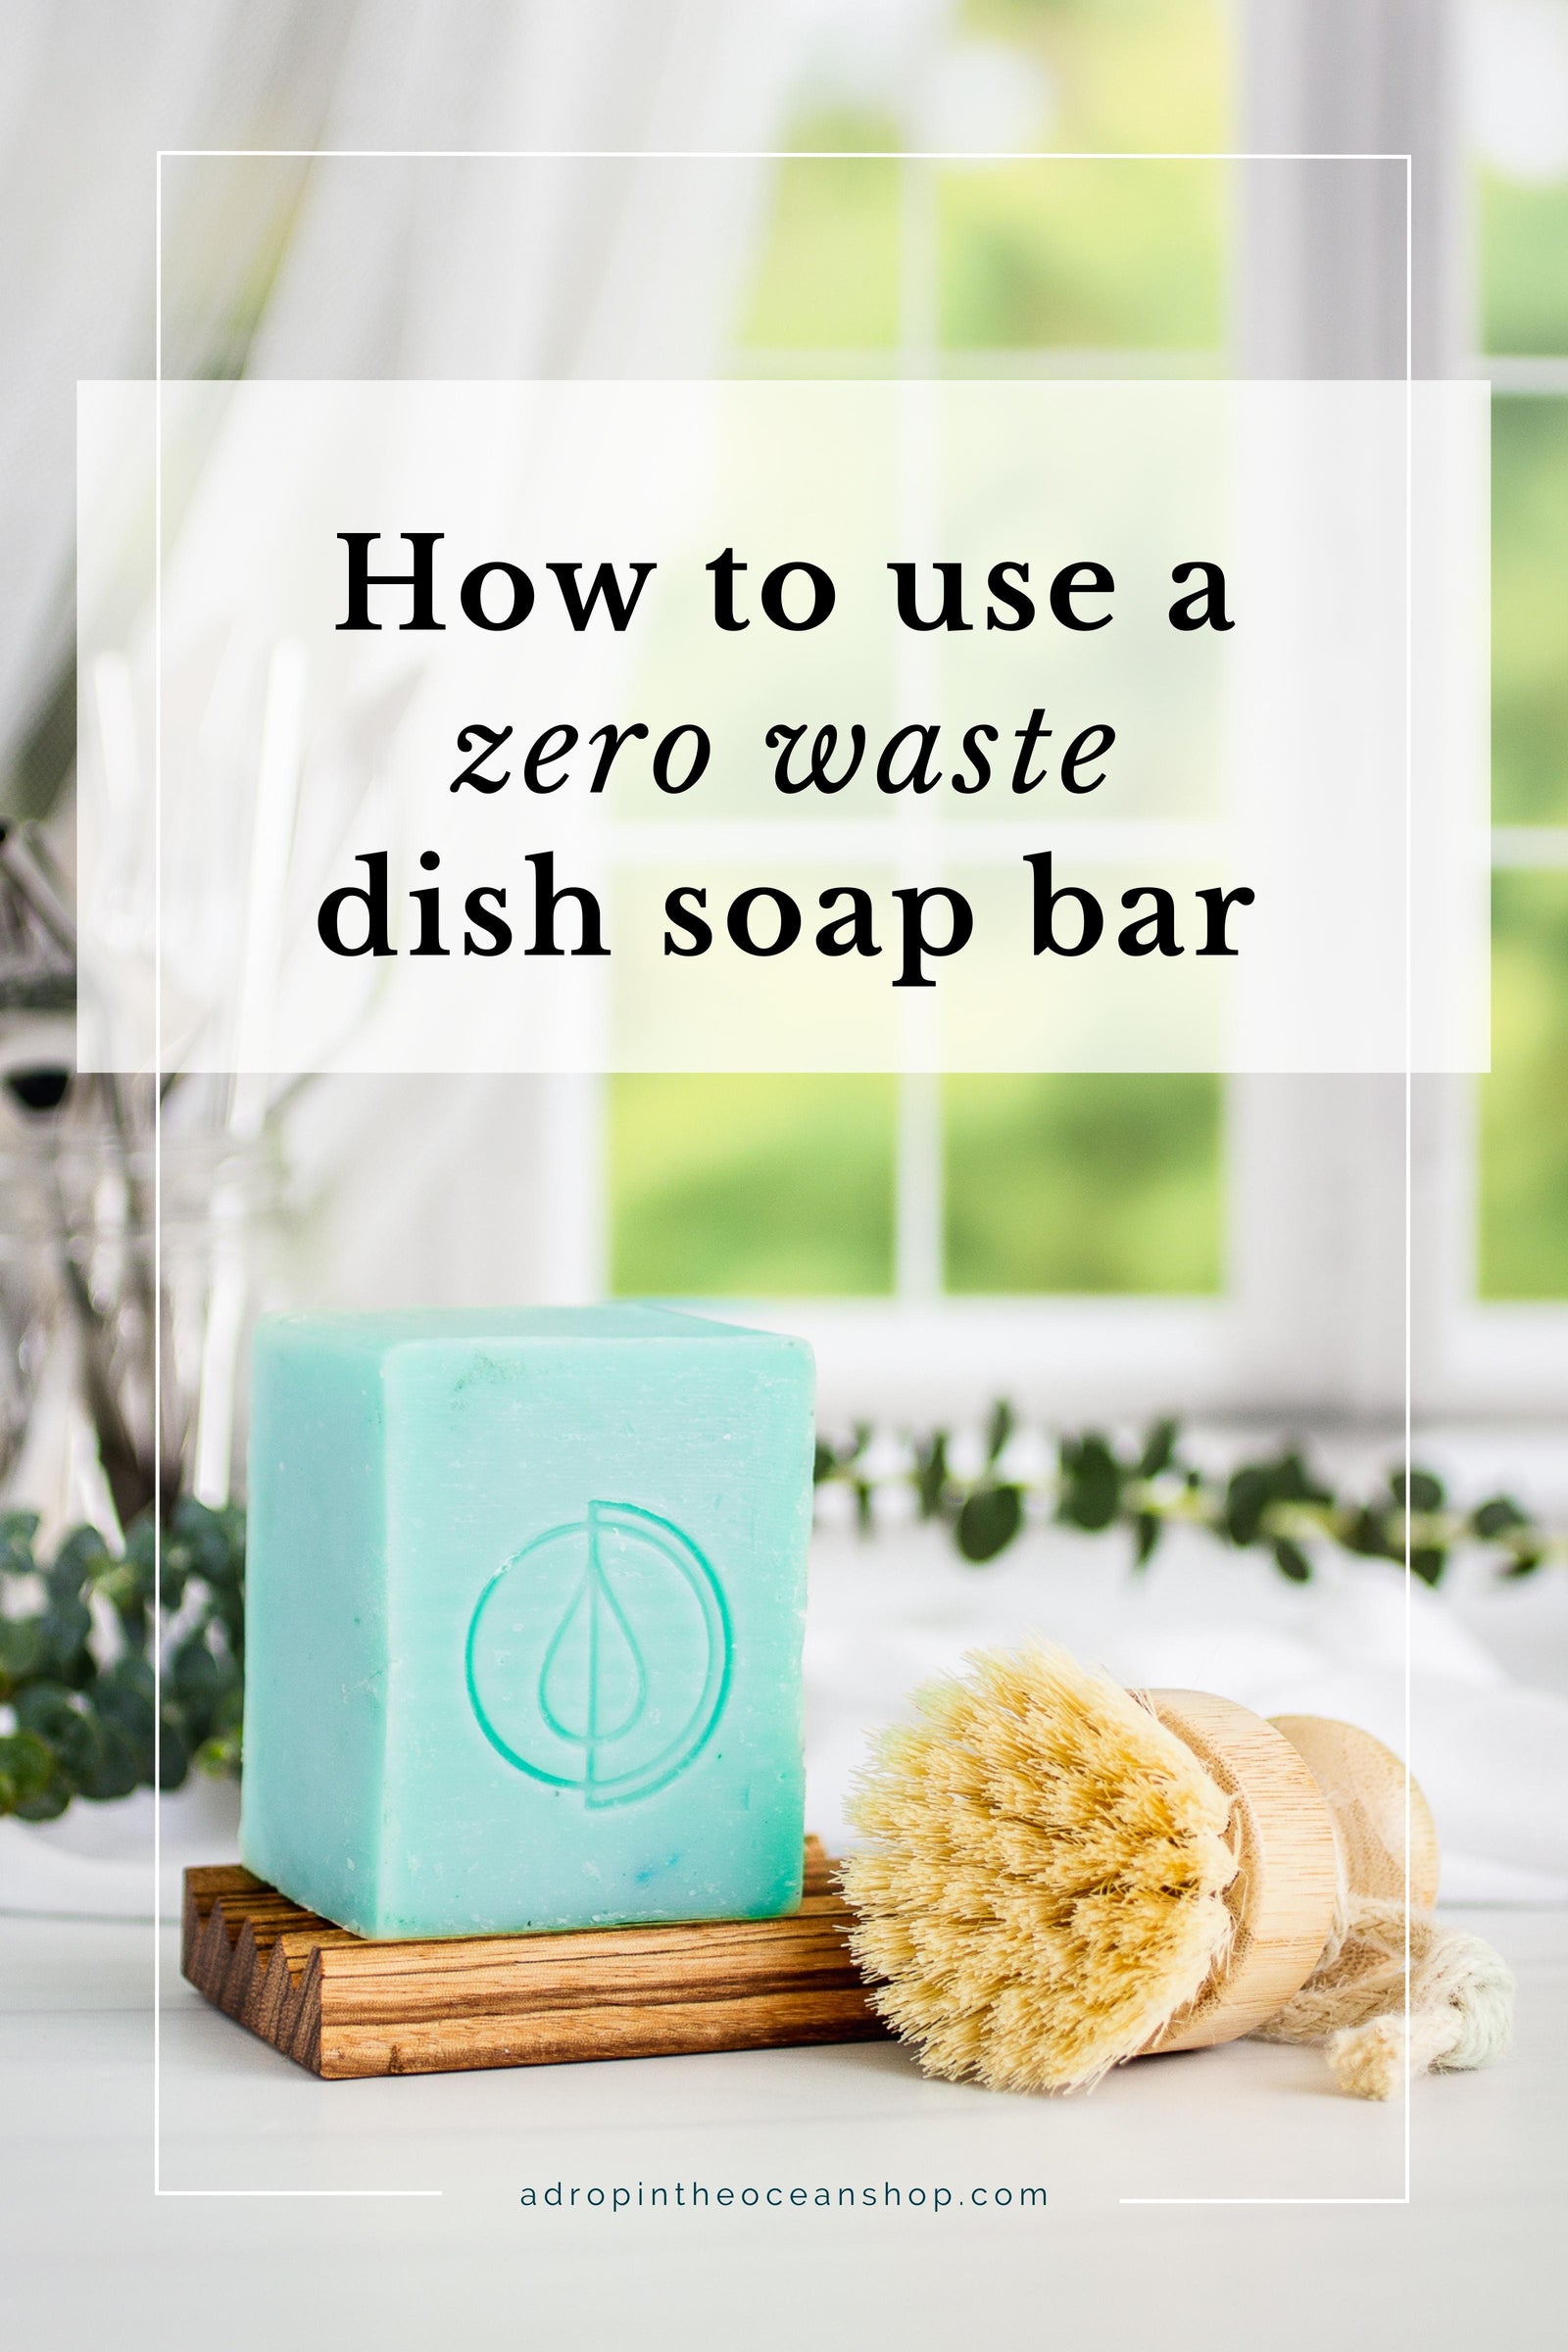 How to Use a Zero Waste Dish Soap Bar